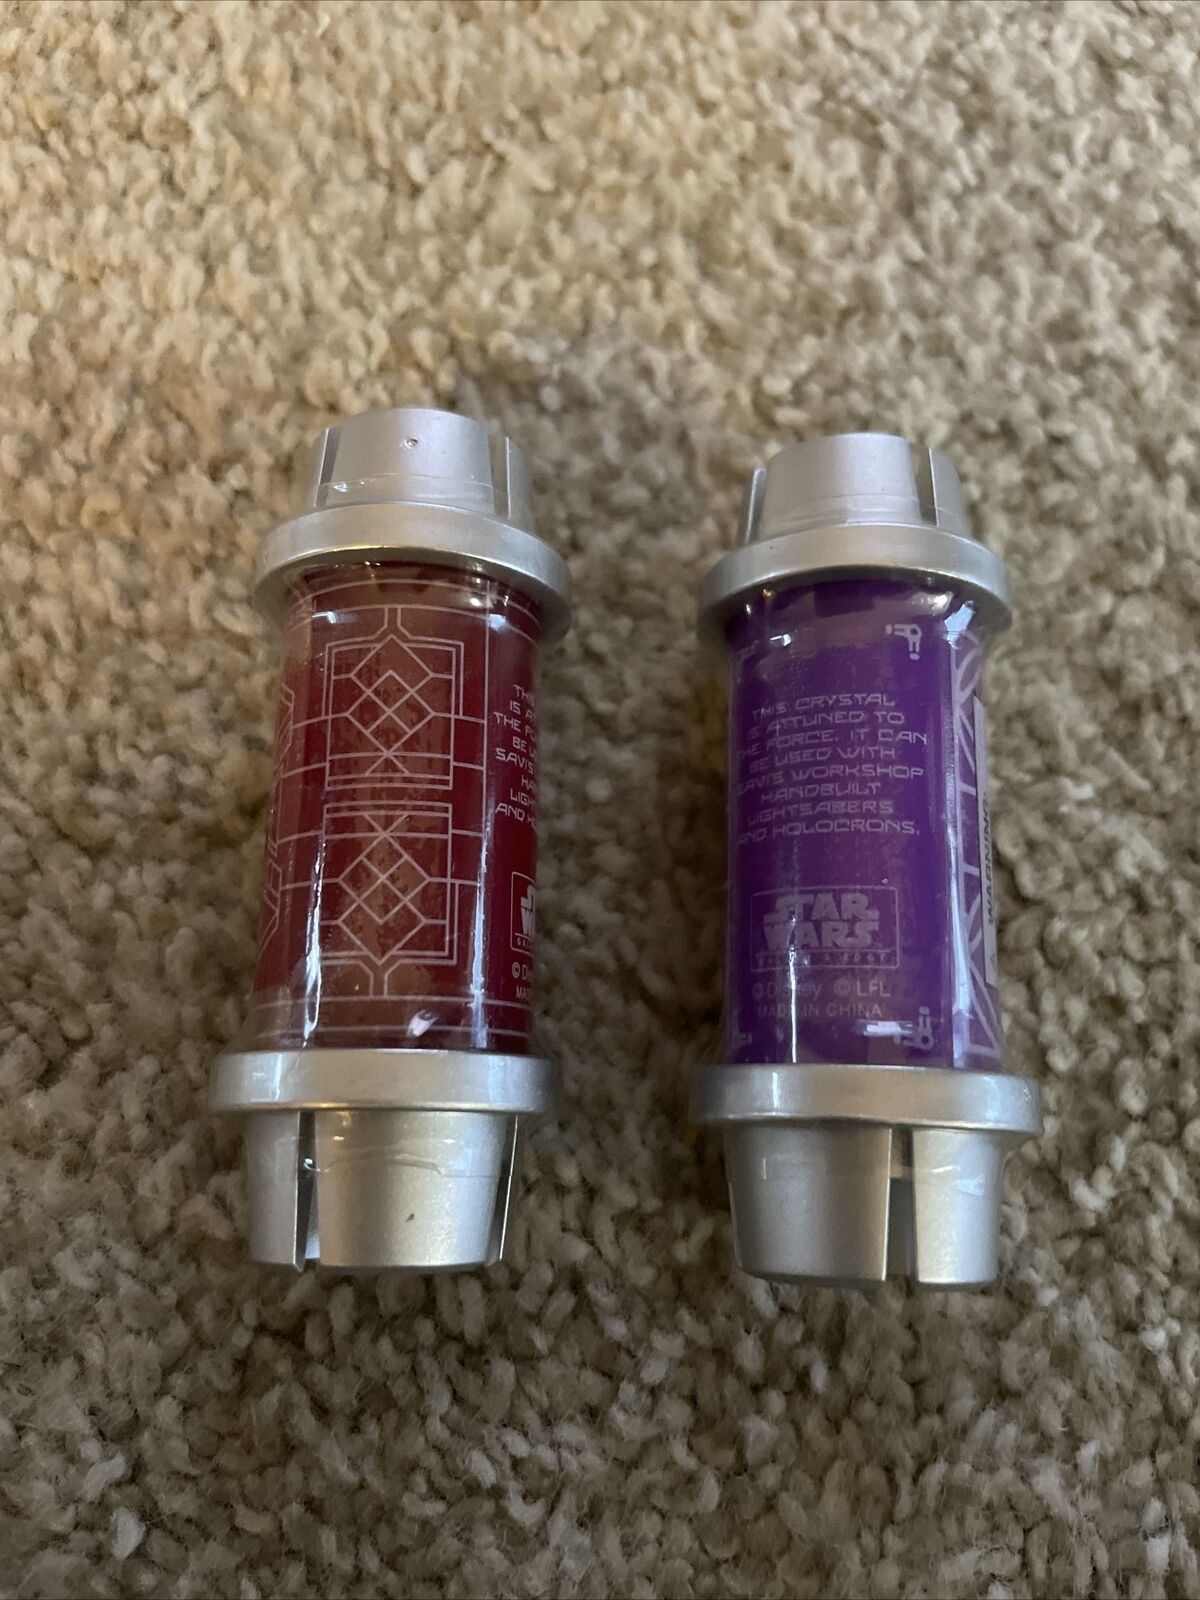   This listing consist of 2 Galaxy’s edge SEALED kyber Crystals: RED PURPLE 